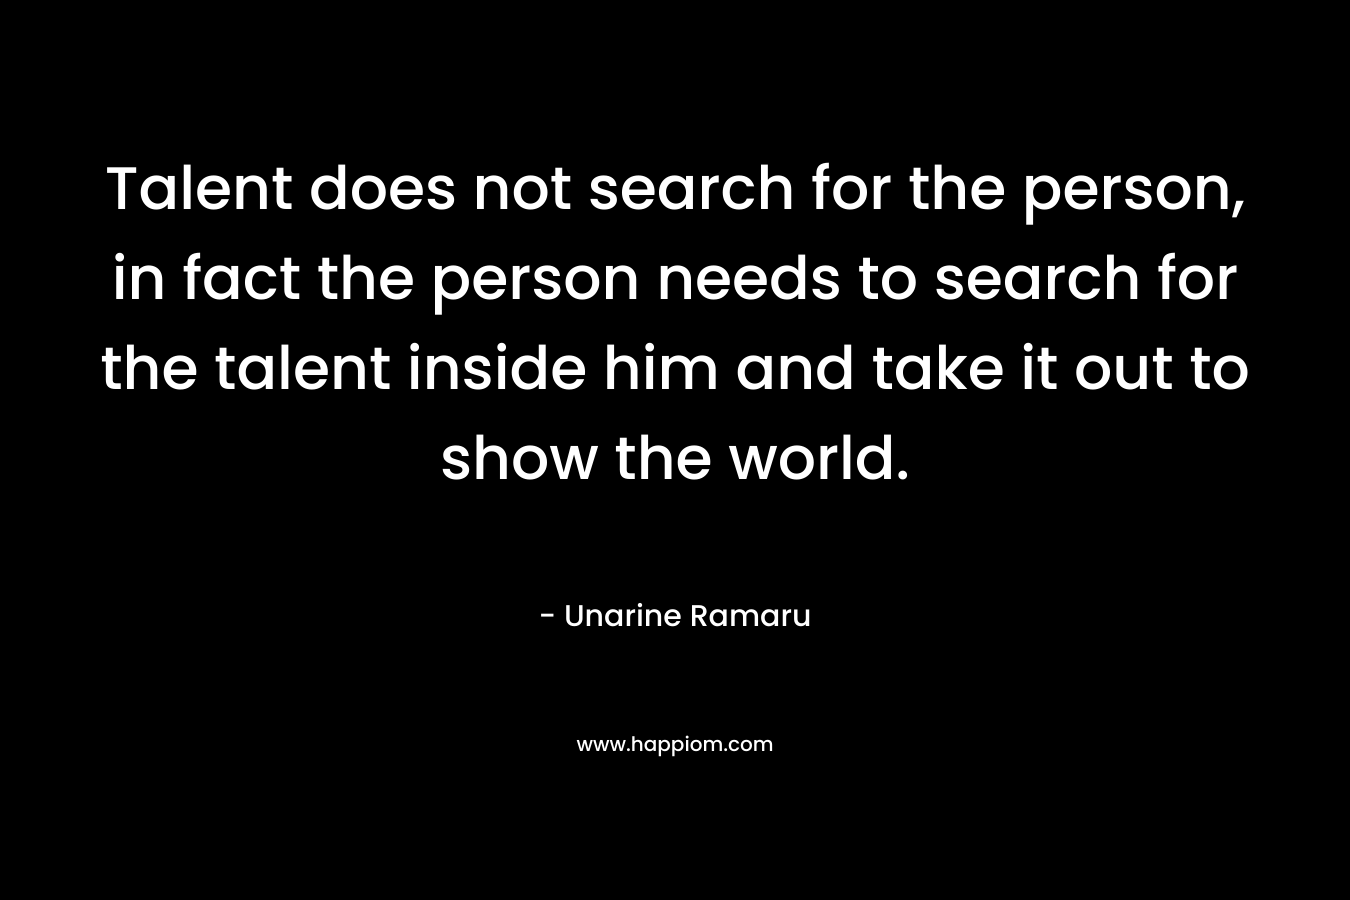 Talent does not search for the person, in fact the person needs to search for the talent inside him and take it out to show the world.